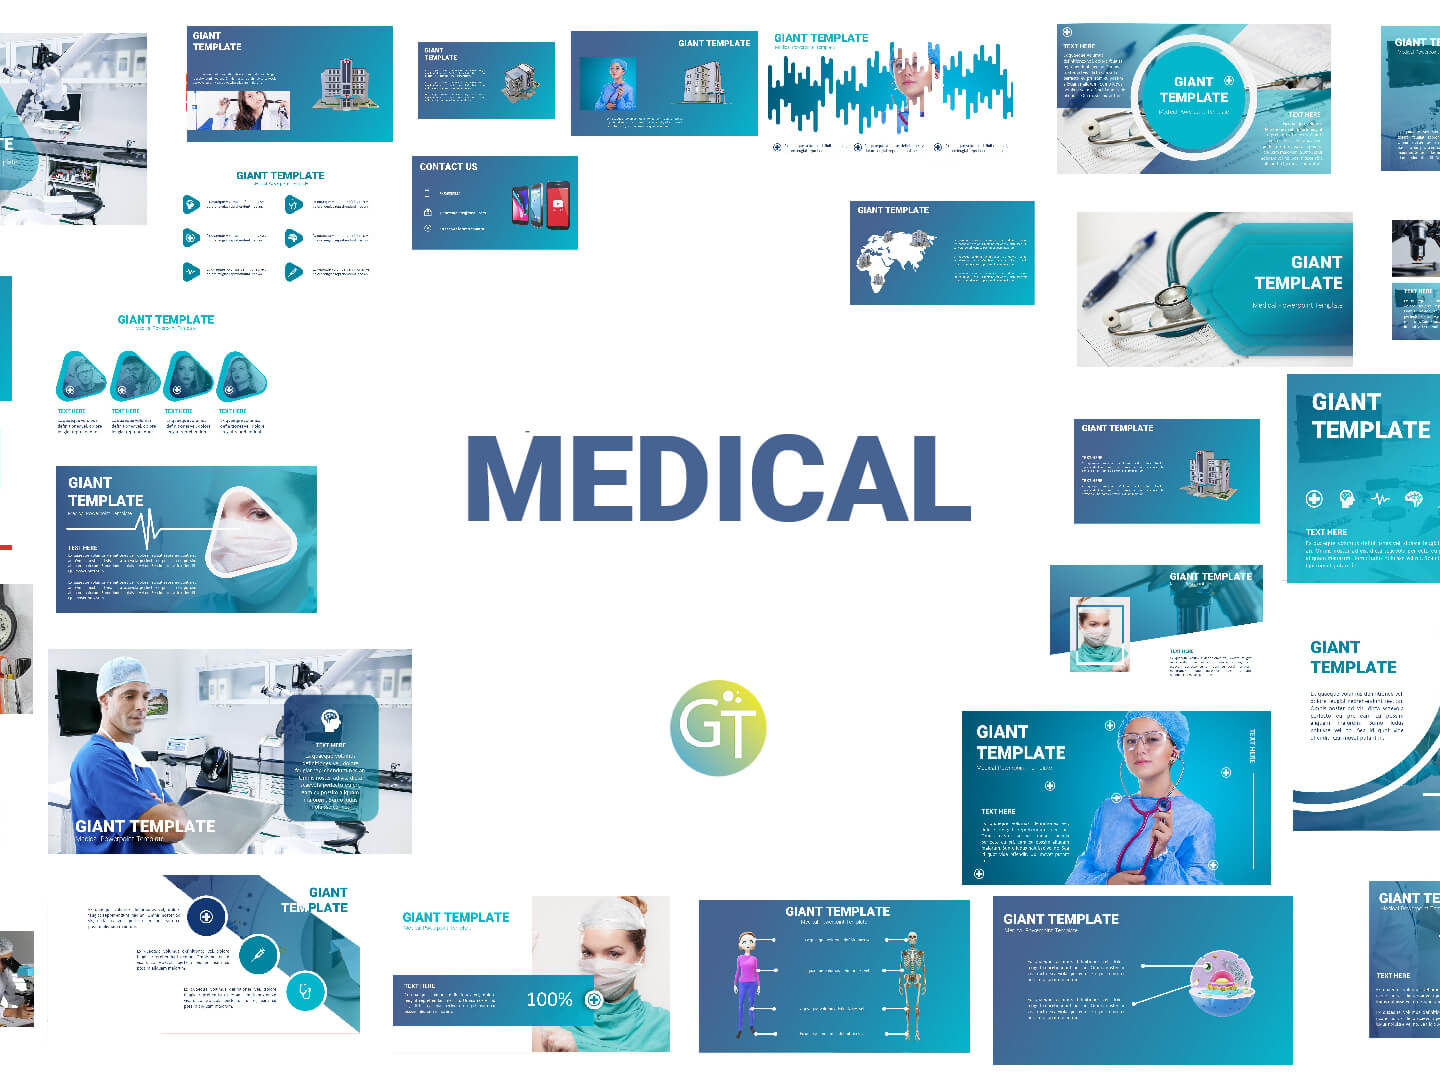 Medical Powerpoint Templates Free Downloadgiant Template For Powerpoint Animation Templates Free Download